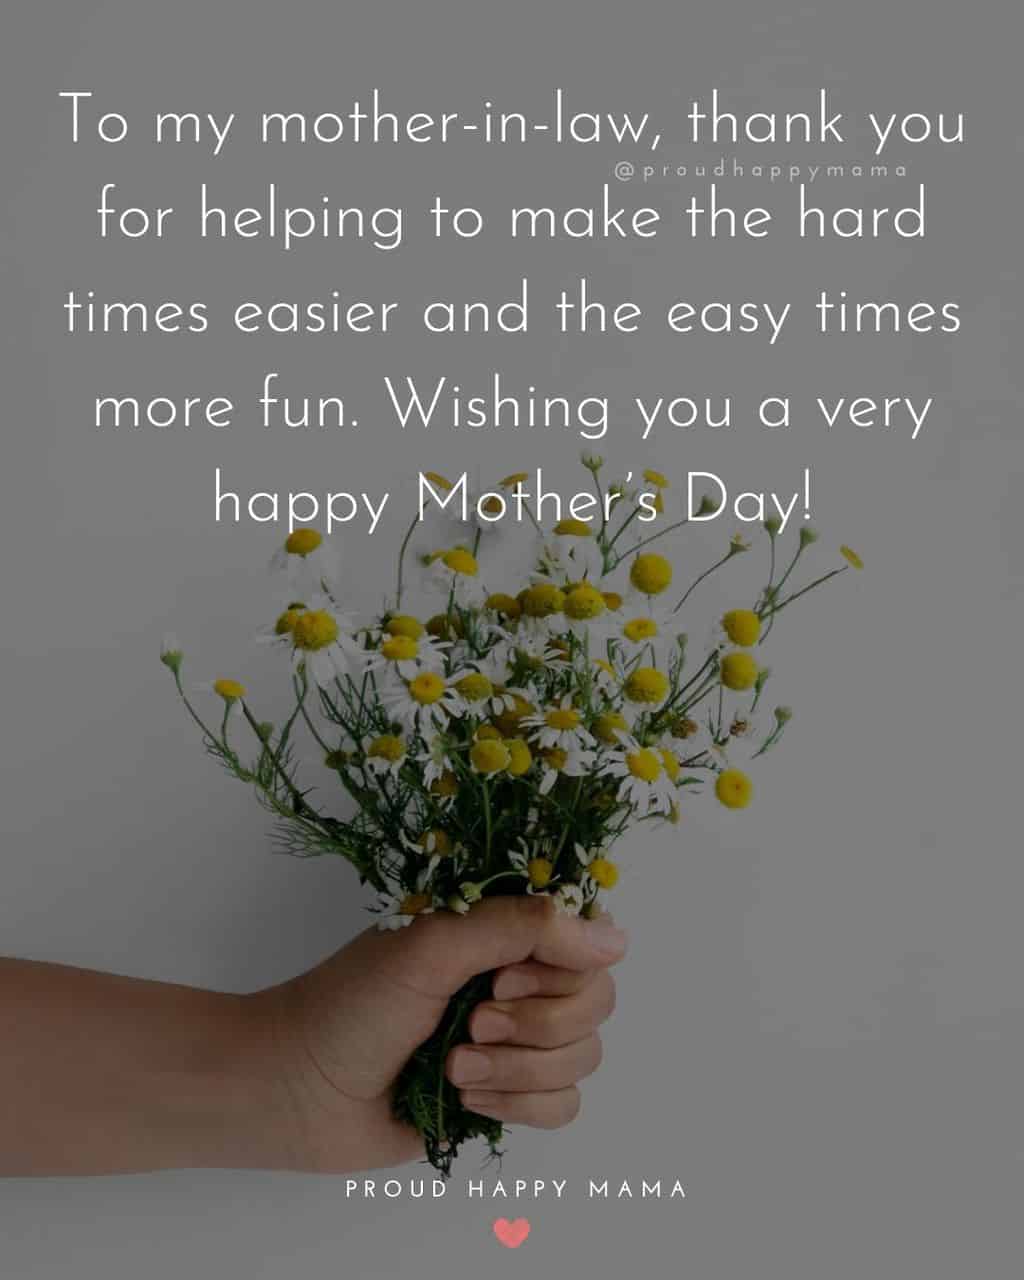 Happy Mothers Day Quotes For Mother In Law - To my mother in law, thank you for helping to make the hard times easier and the easy